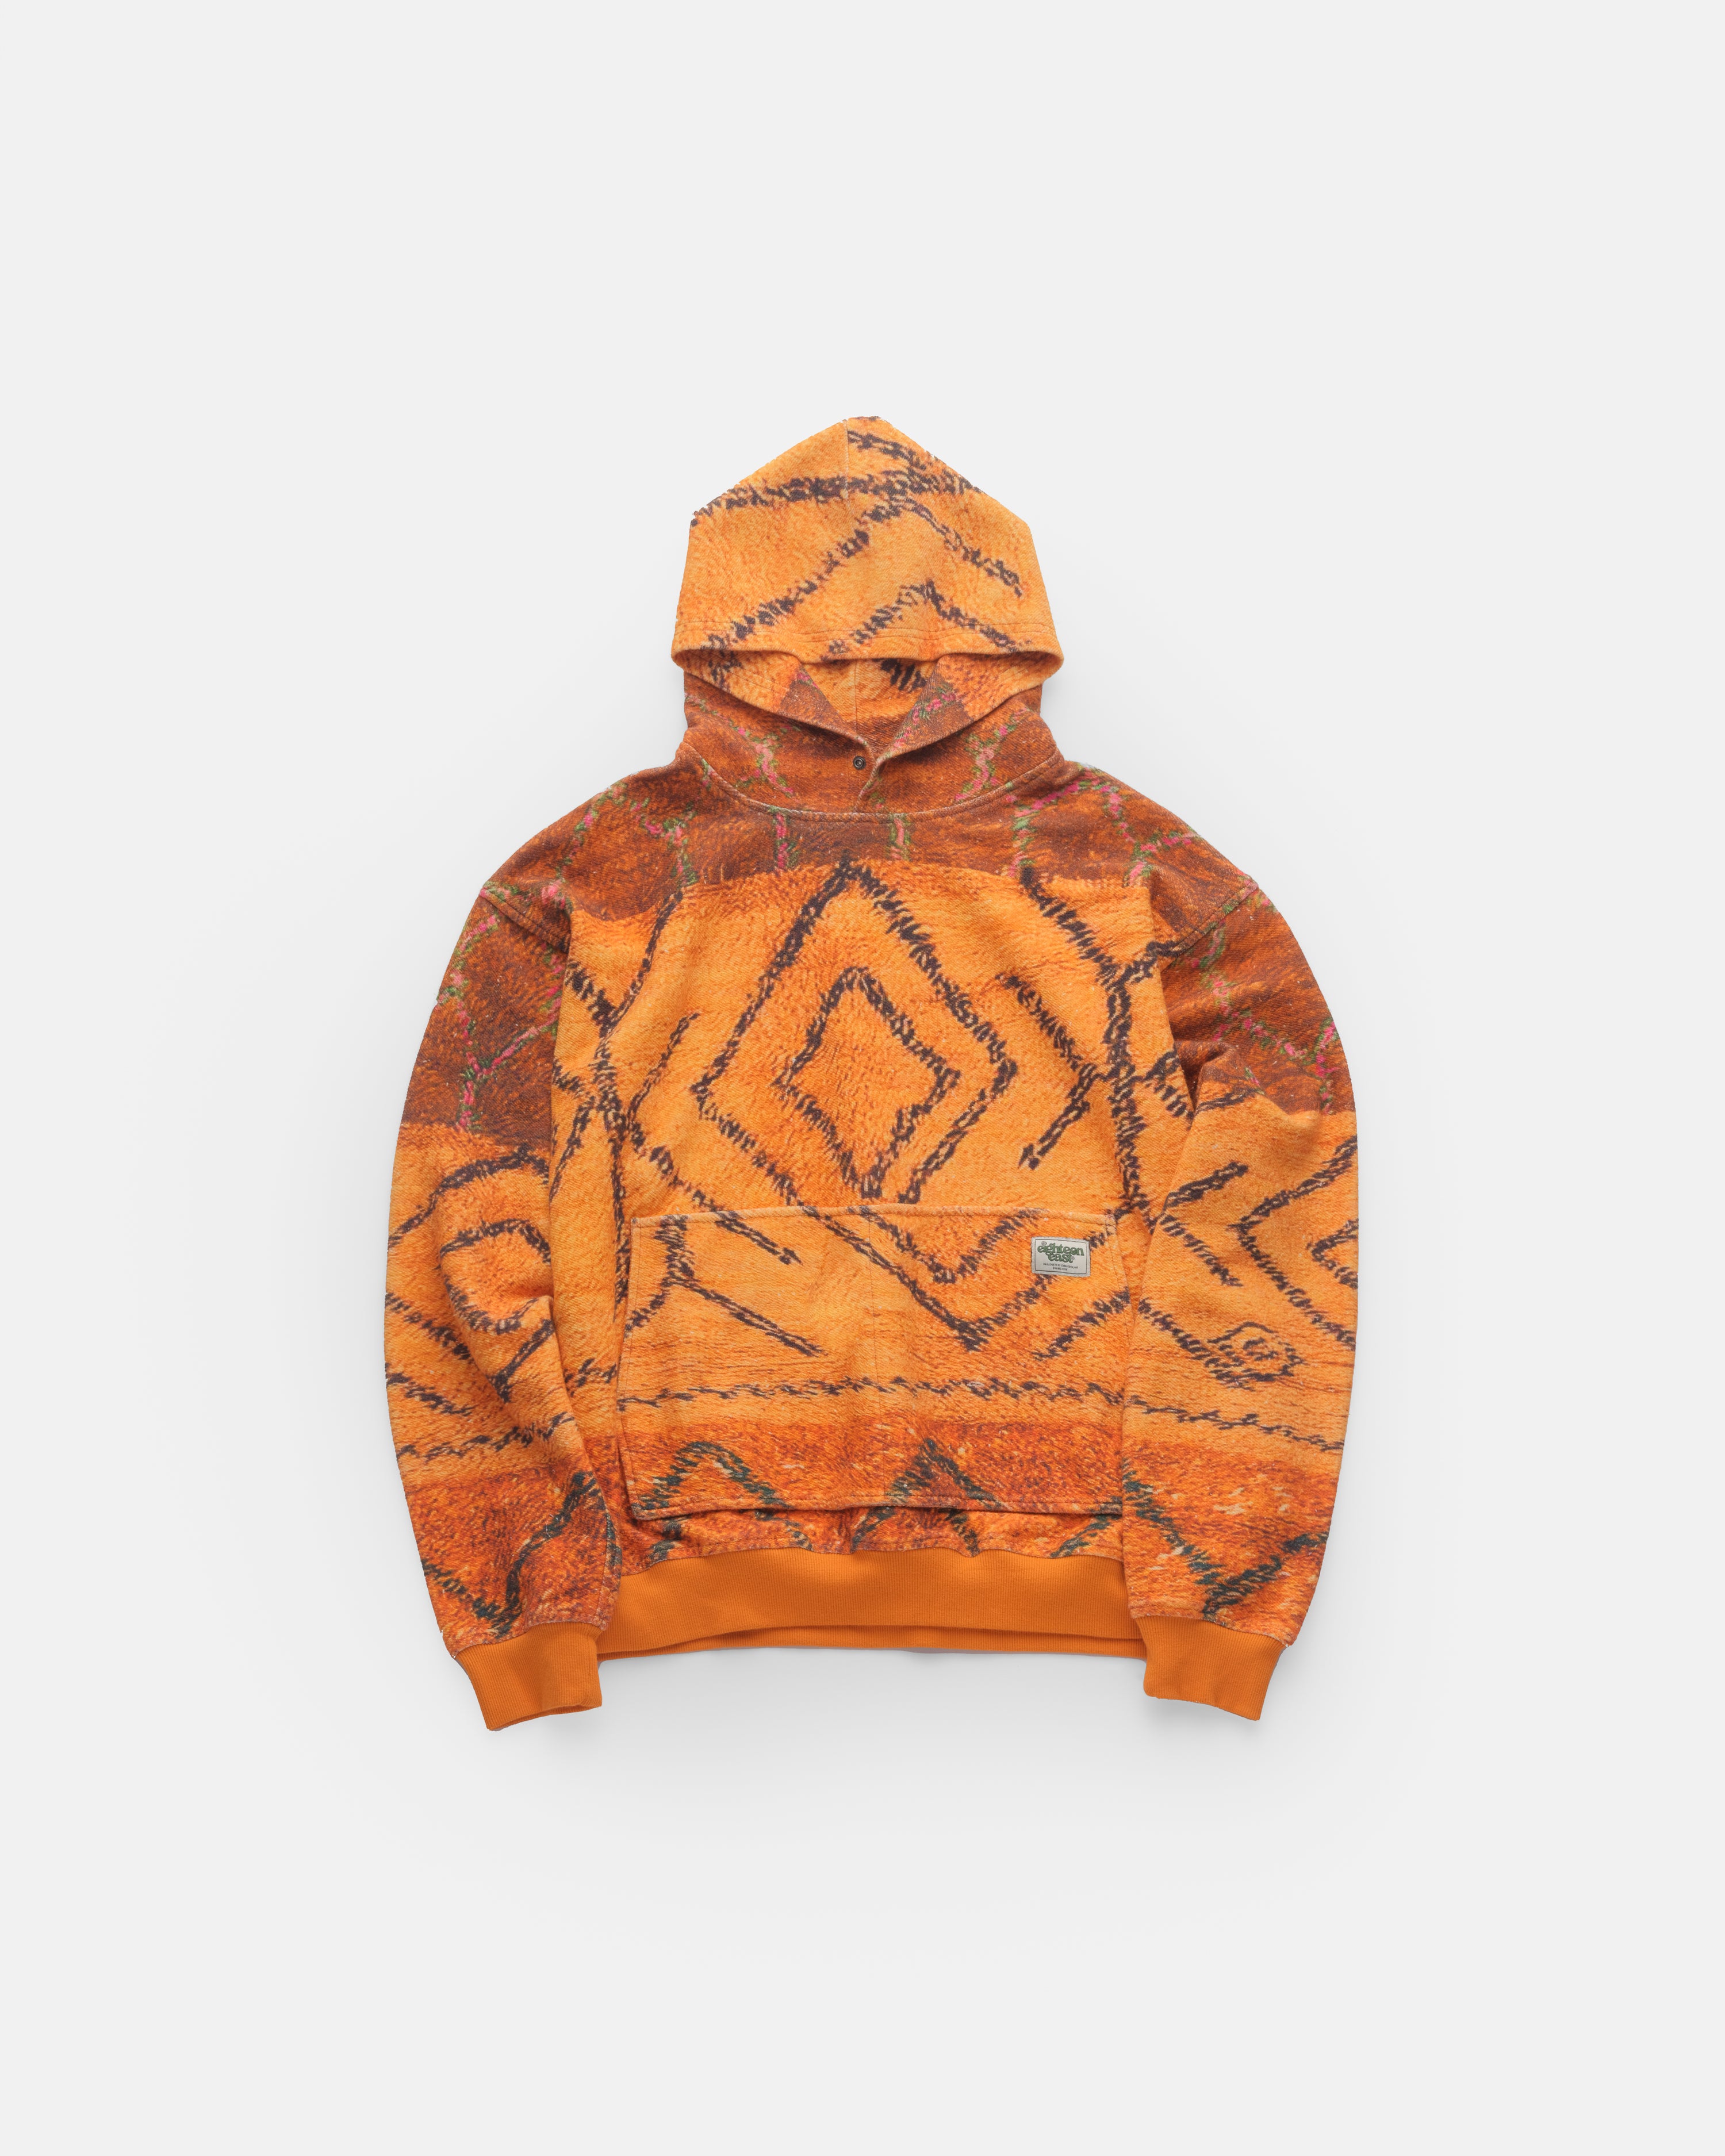 INDORF SNAP NECK HOODED SWEATSHIRT - GINGER TROMPE L'OEIL AZILAL REVERSE LOOPBACK TERRY